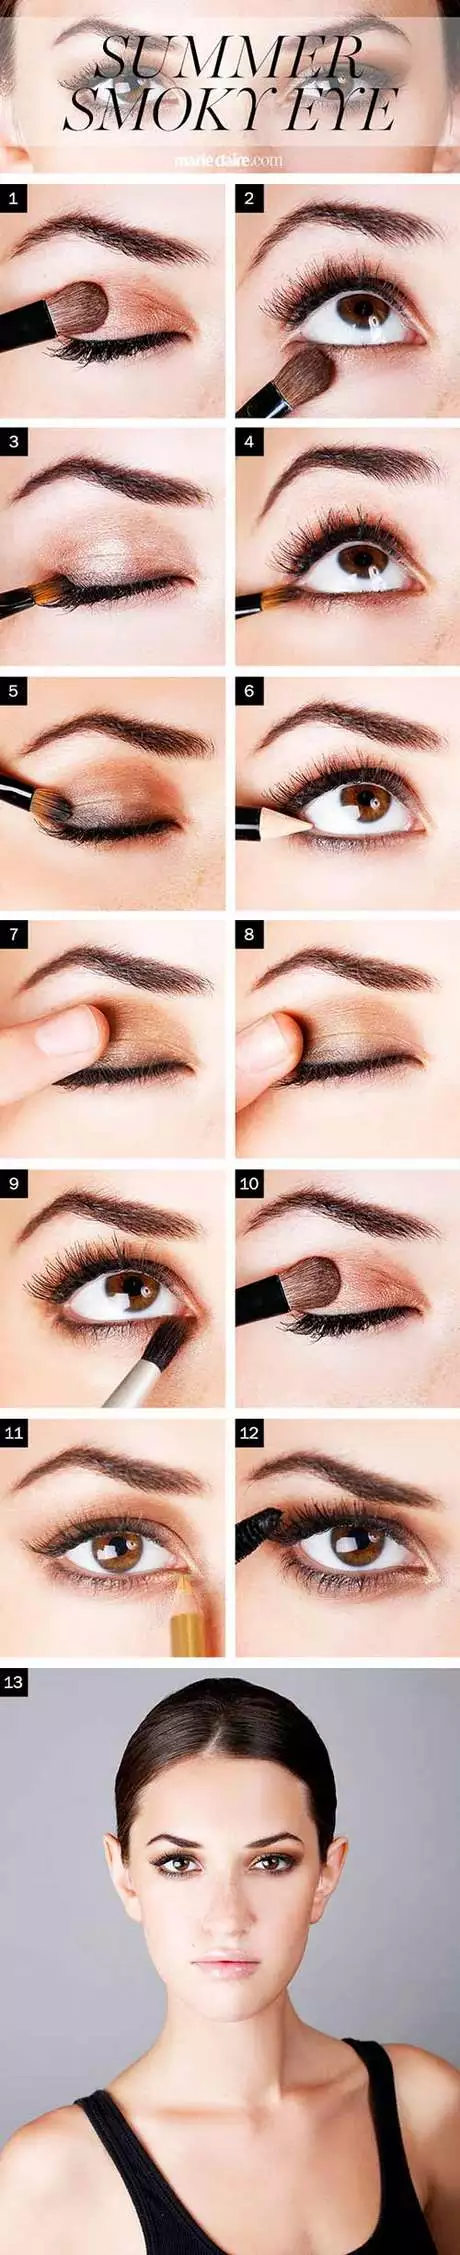 bronze-smokey-eye-makeup-93-2 Bronze smokey eye make-up